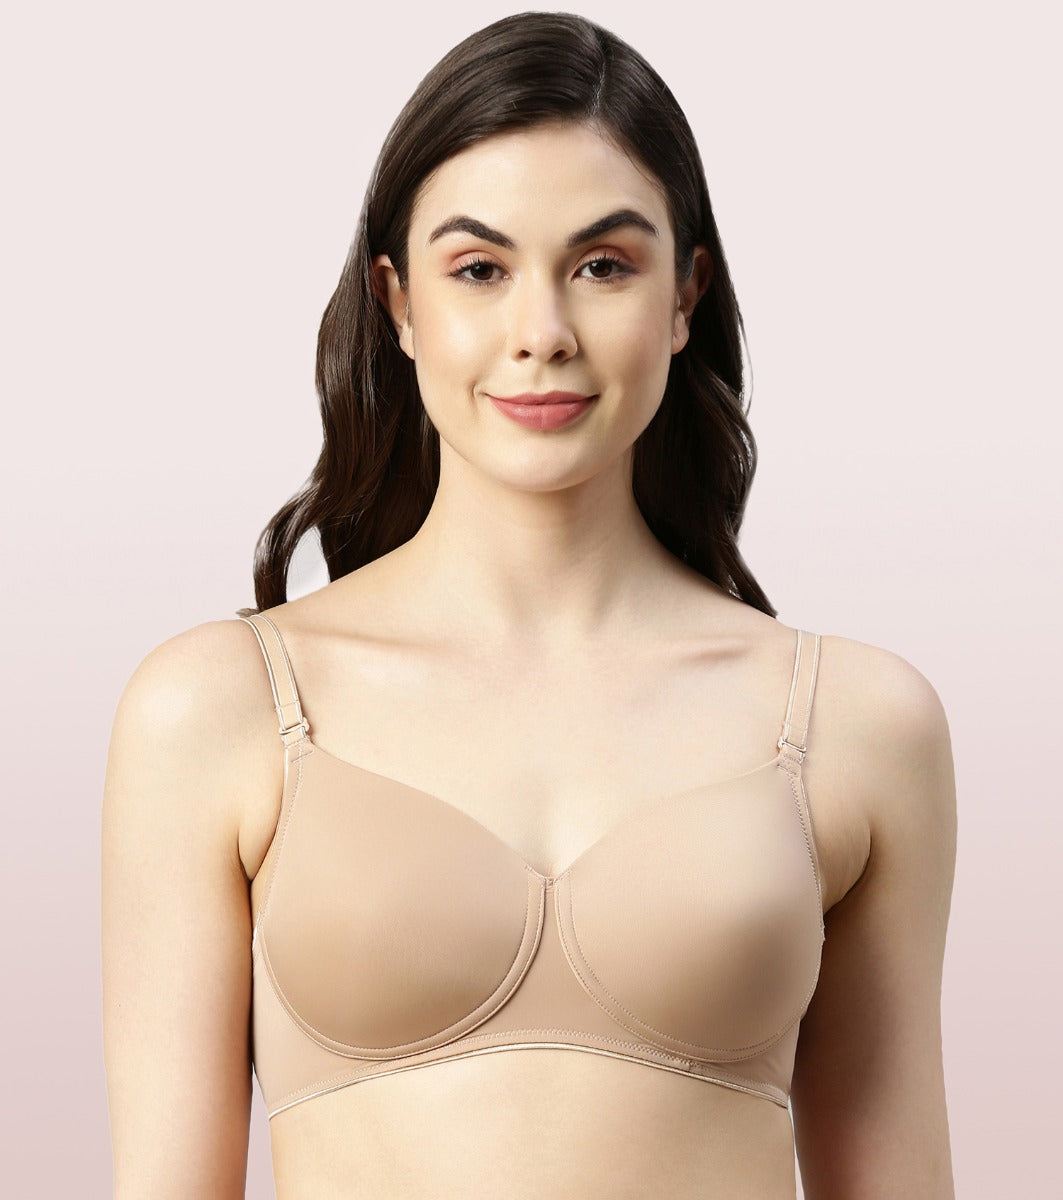 Enamor Dope Dye F165 Ecolite Fabric Smooth Support Bra for Women - Padded, Wirefree and High Coverage - Honey Beige